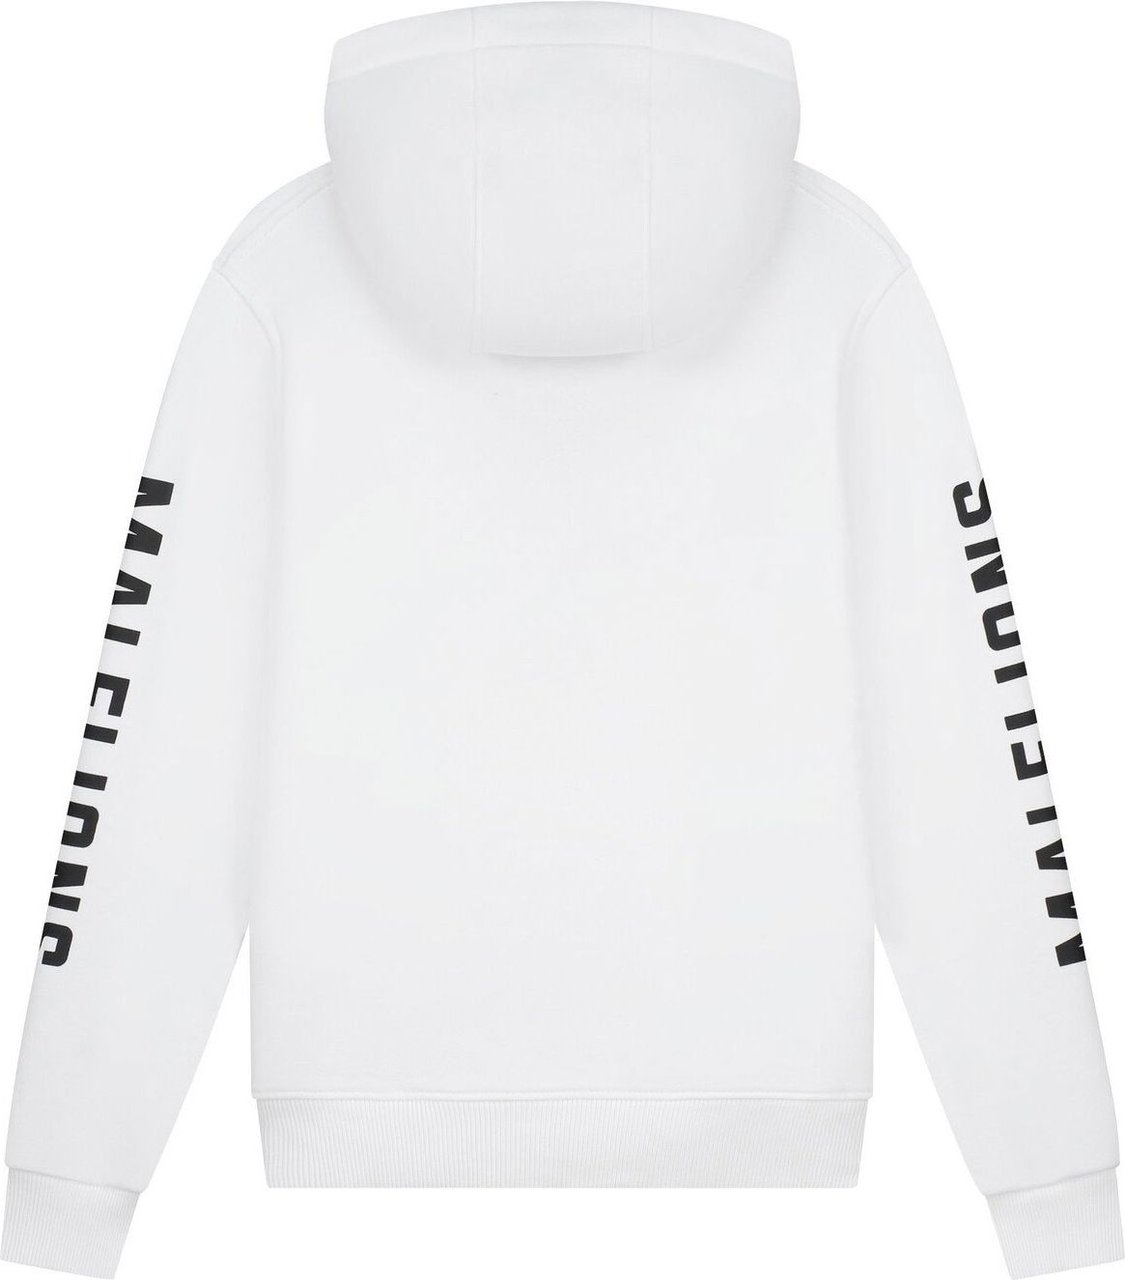 Malelions Lective Hoodie - White/Black Wit